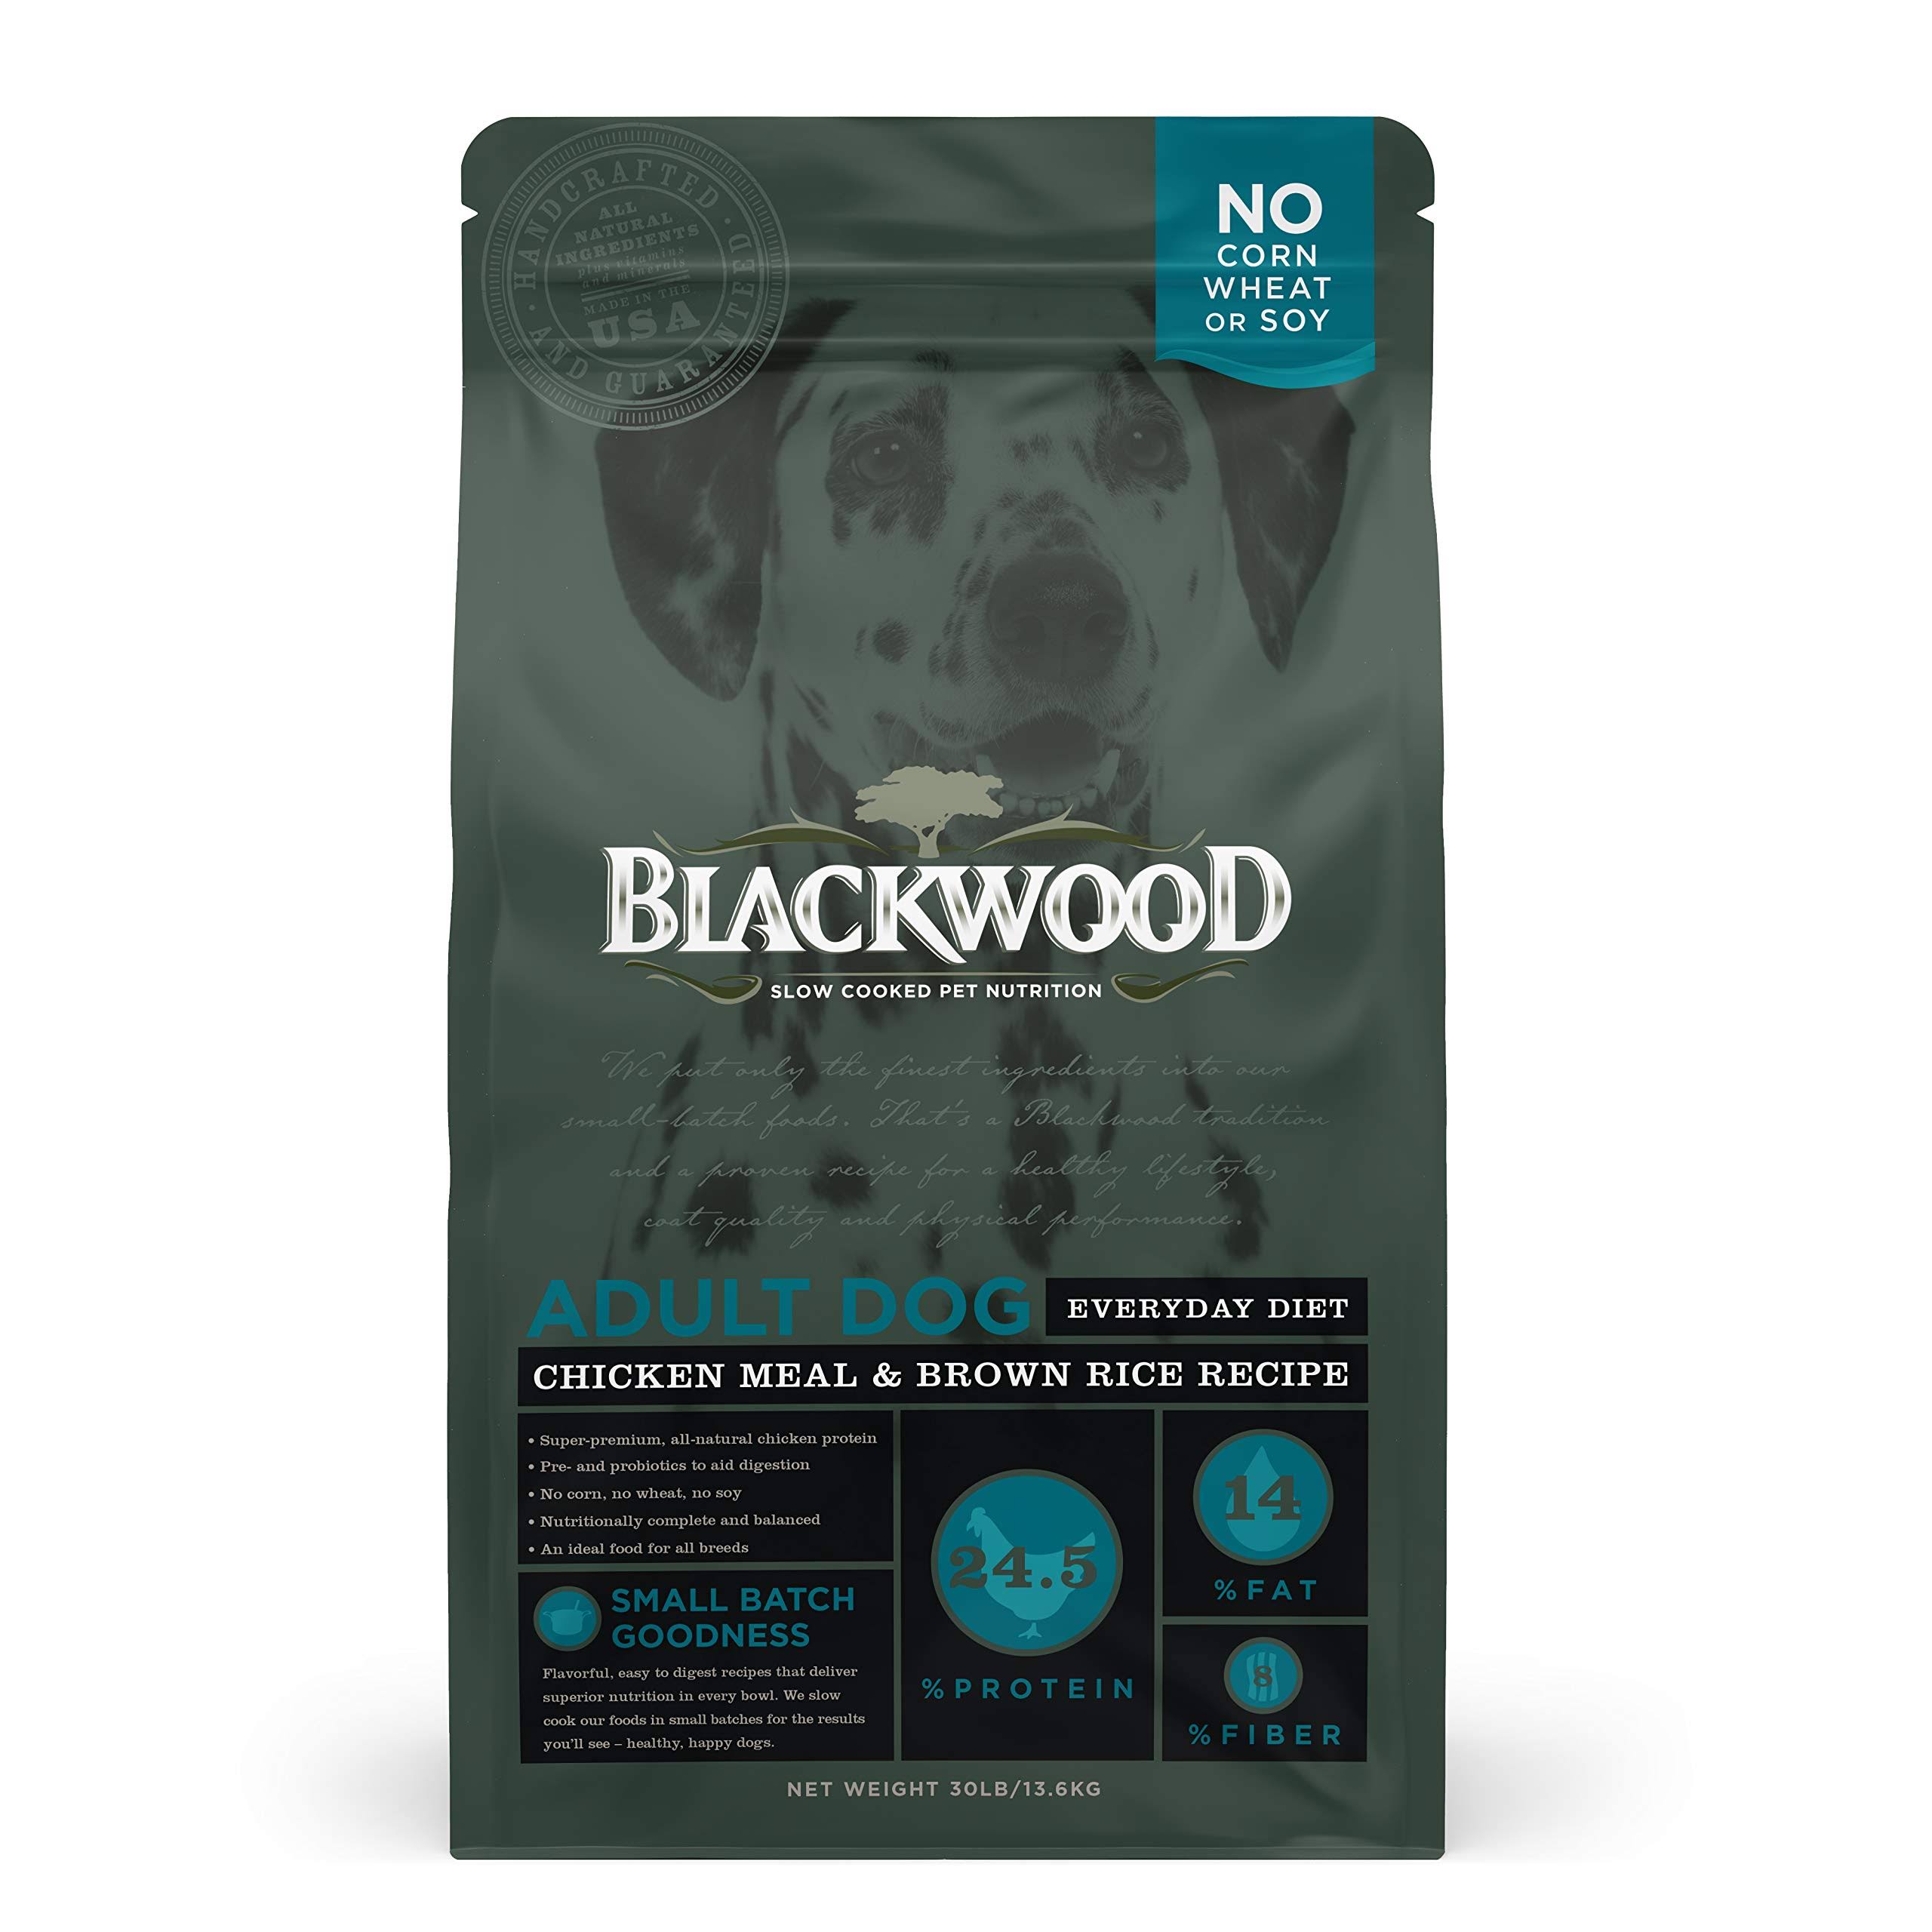 Blackwood Chicken Meal & Rice Recipe Everyday Diet Adult Dry Dog Food, 30-lb